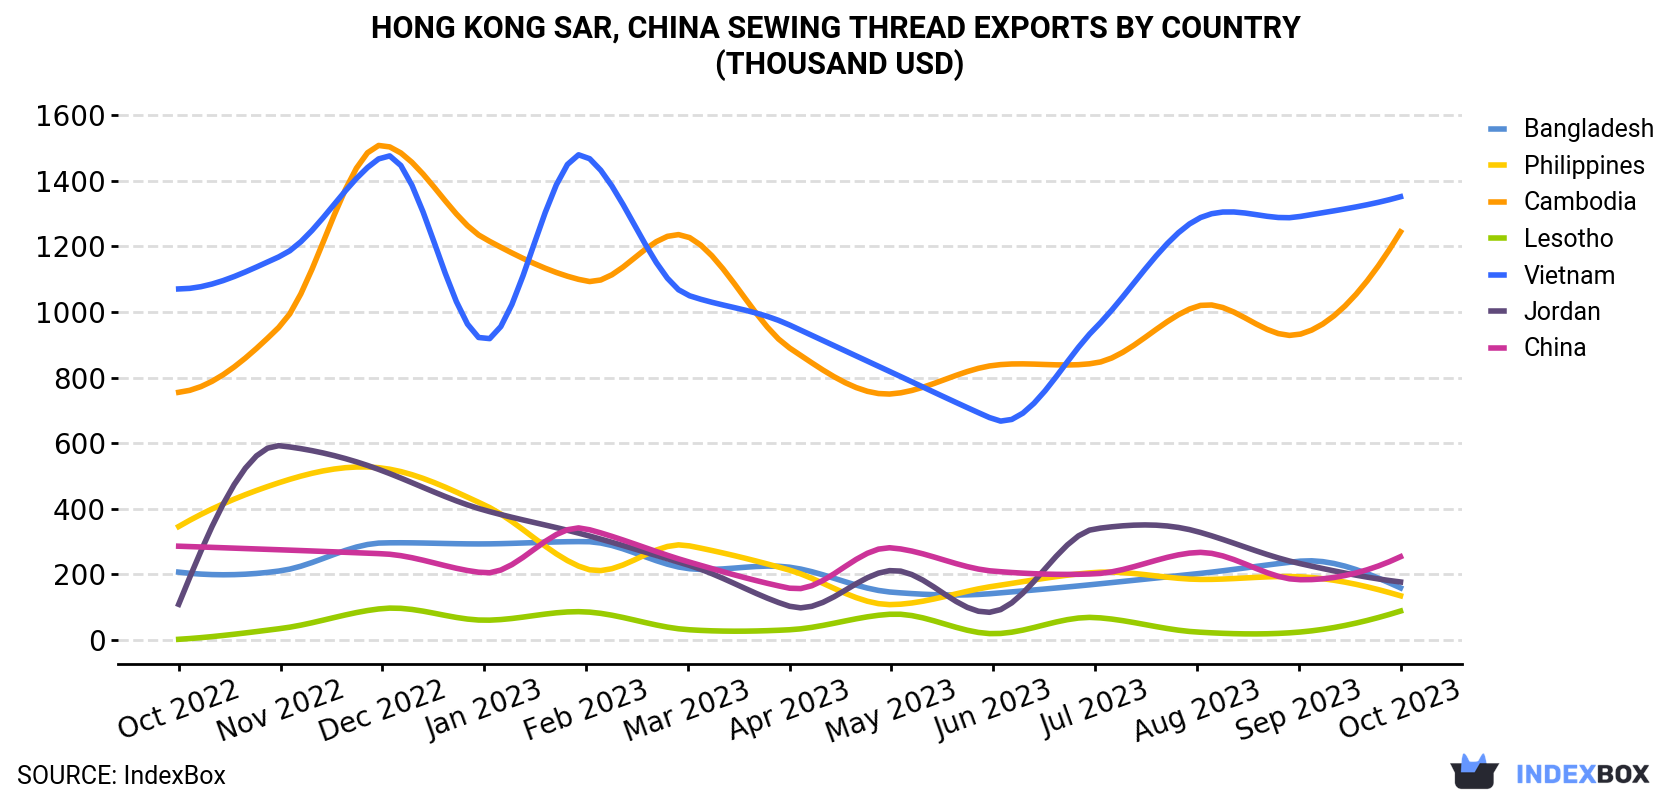 Hong Kong Sewing Thread Exports By Country (Thousand USD)